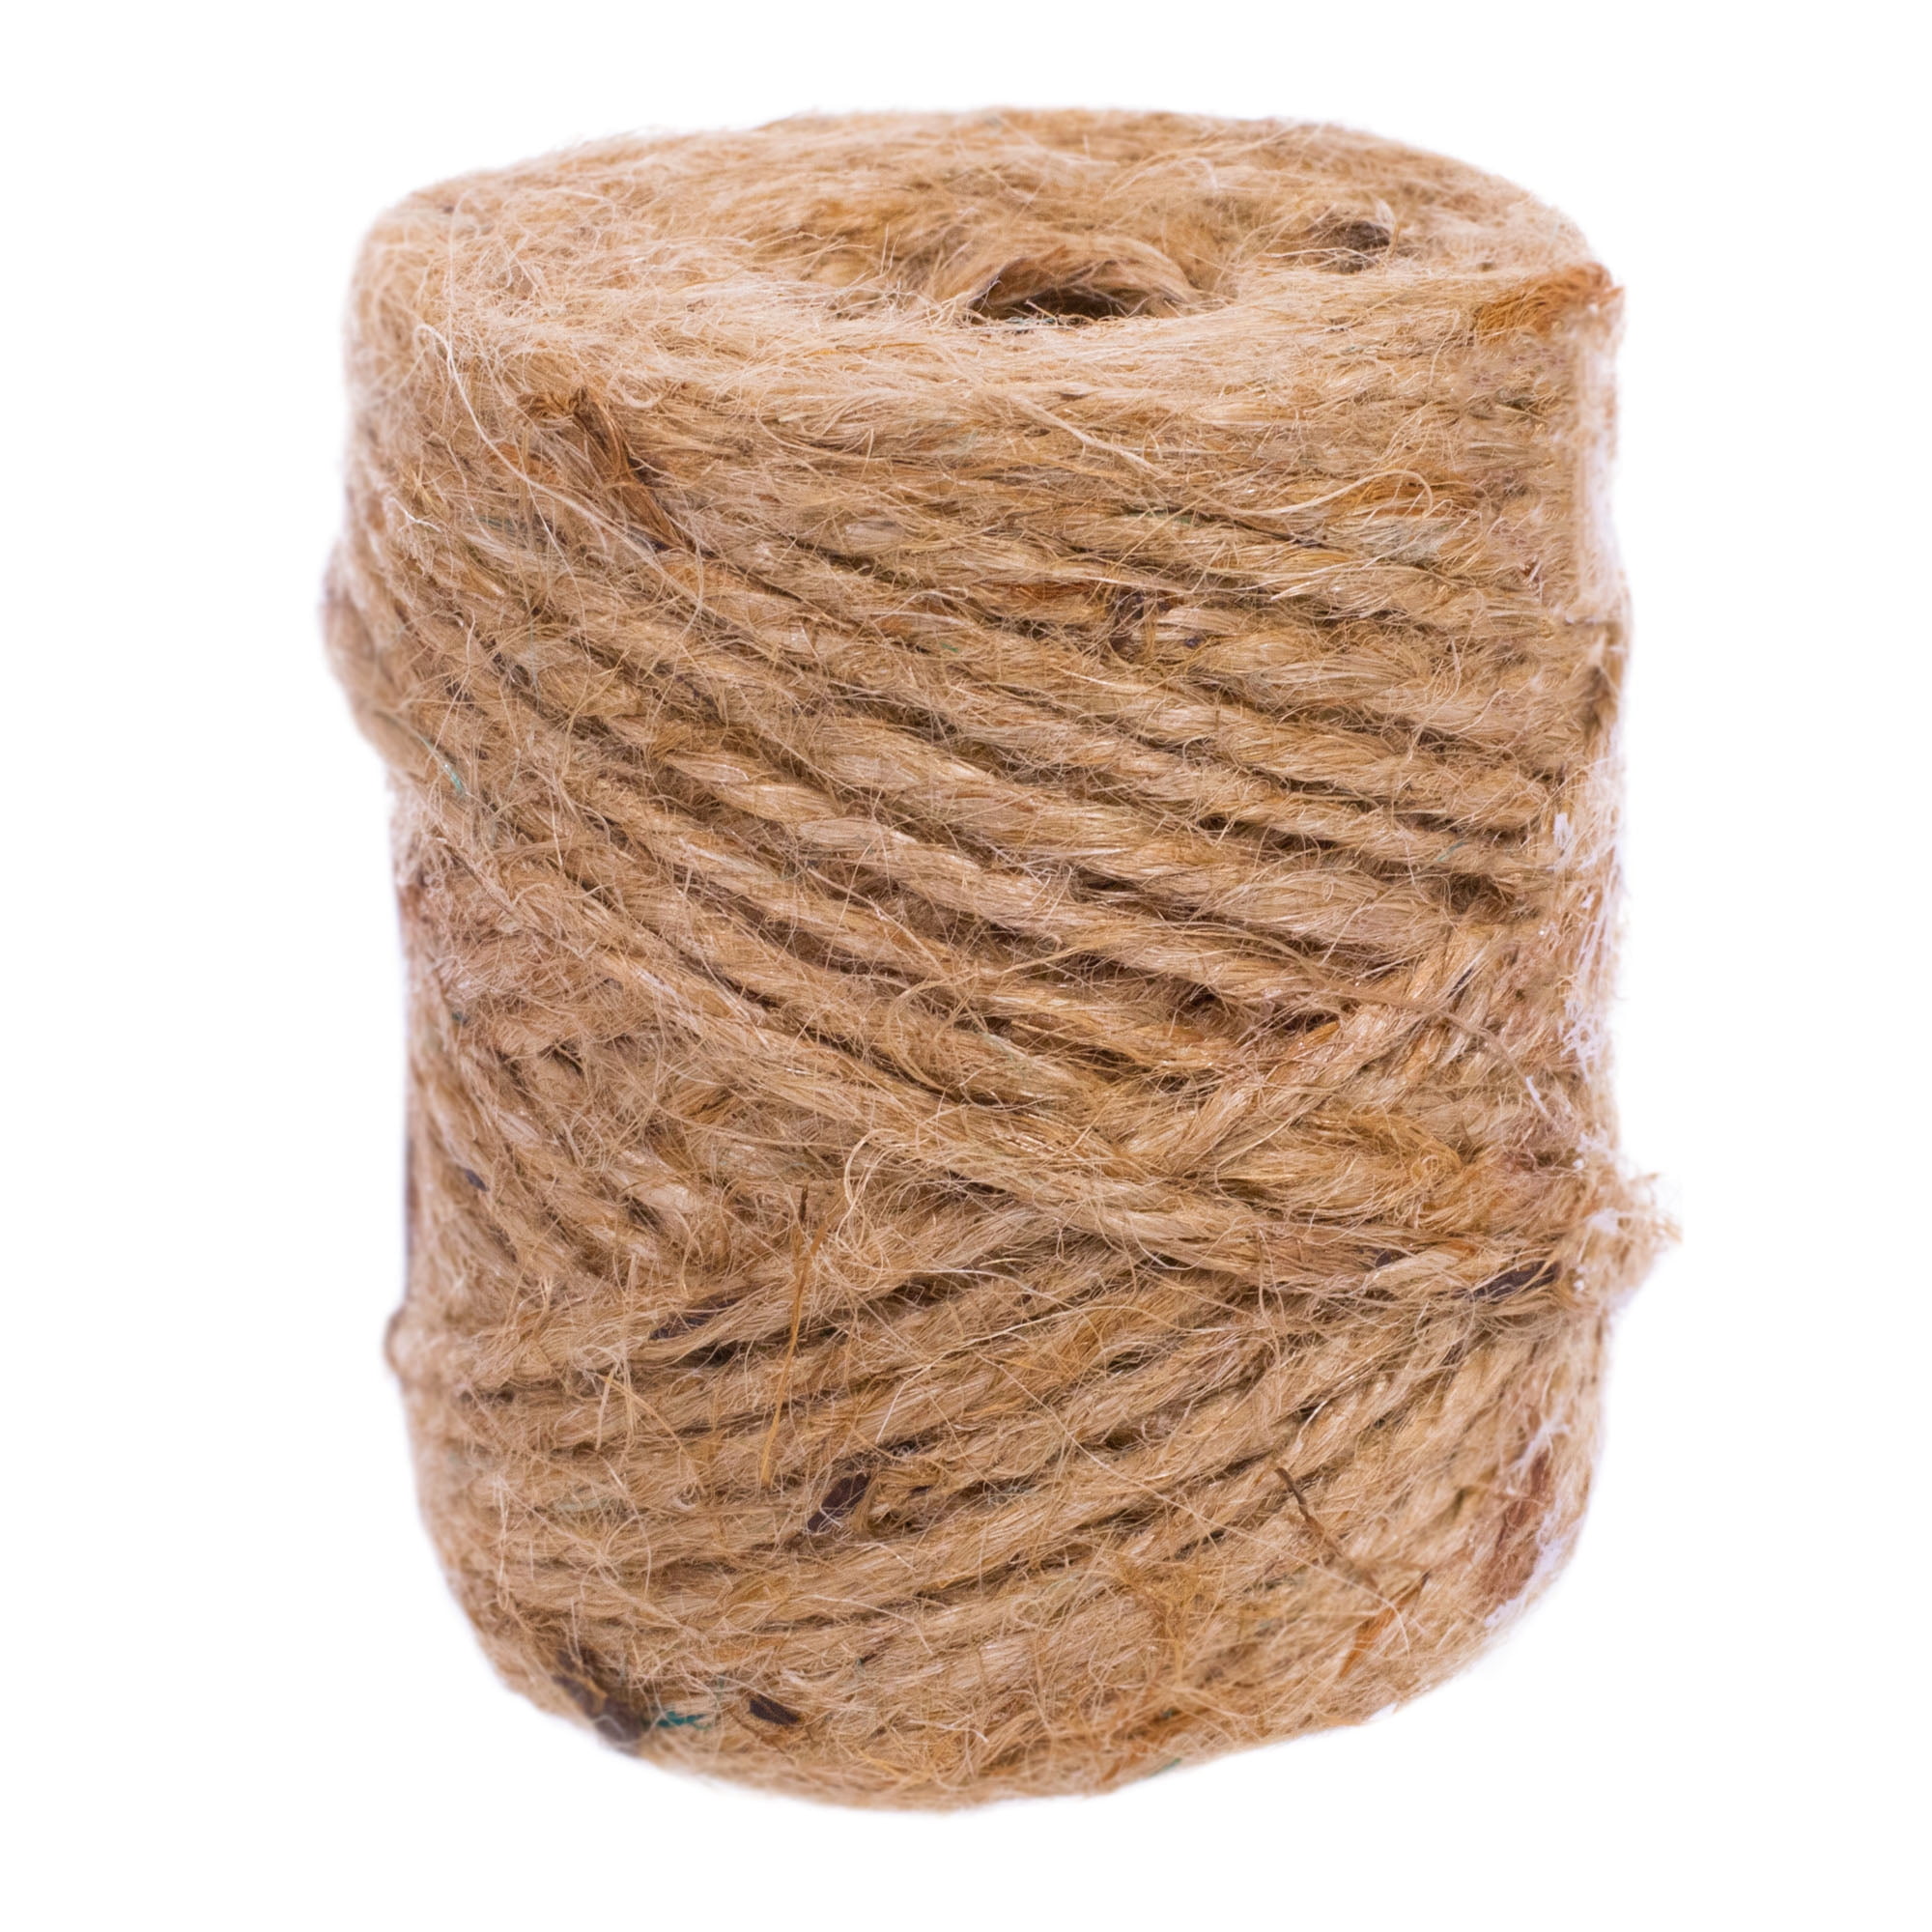 Joyberg 984 ft Twine String, Natural Jute Twine, 2mm Thin White Cotton Twine Rope, 10PLY Black Cotton Twine for Crafts, Art, Gardening Plants, Gift